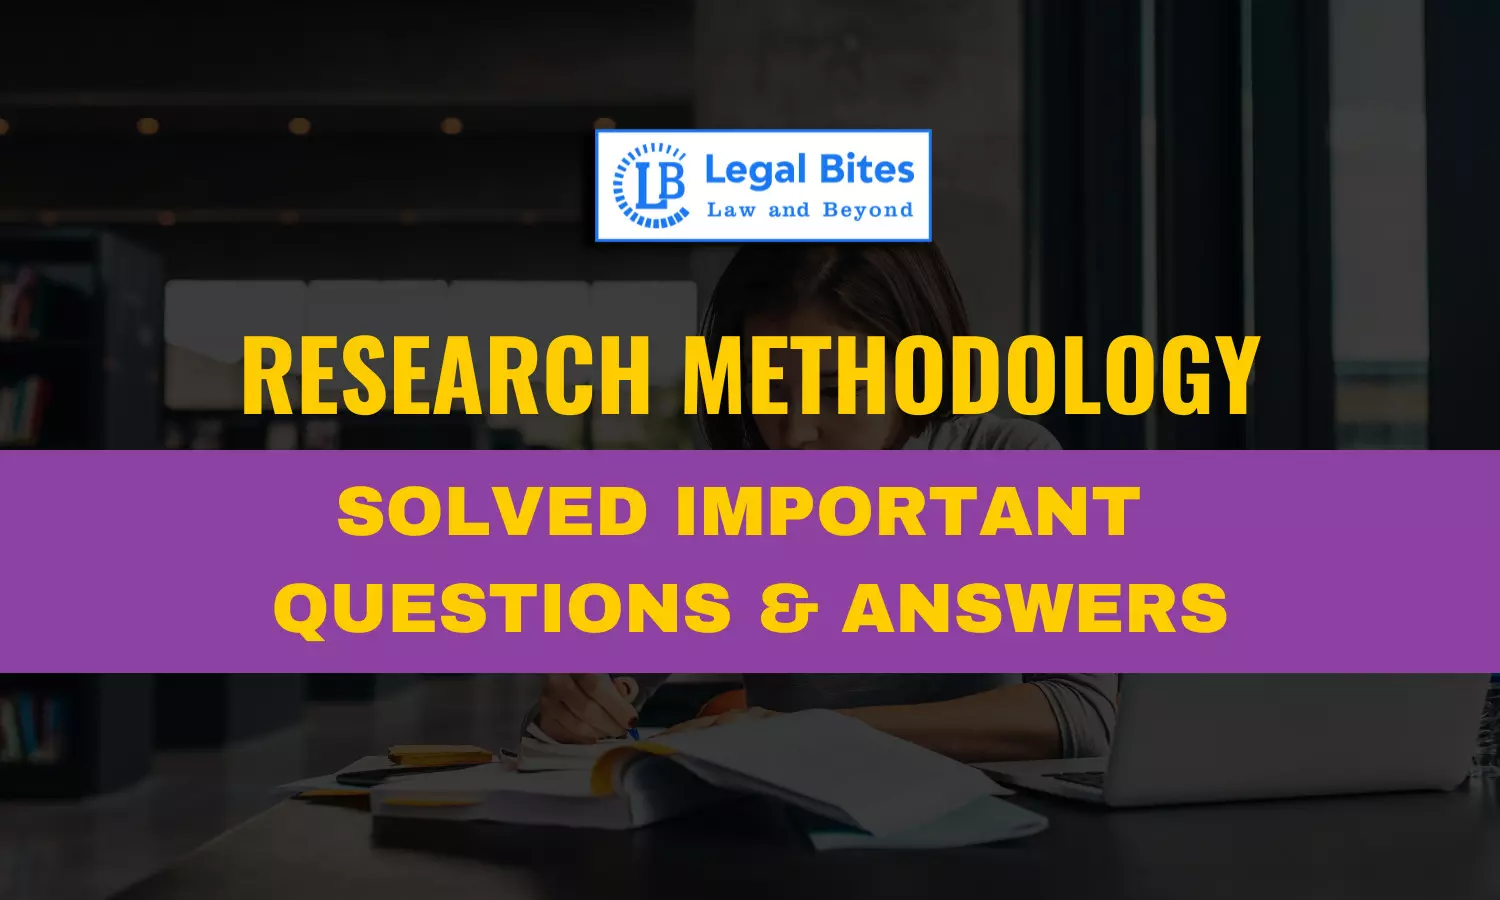 Discuss the importance of correct referencing with particular emphasis the use of Bibliography and footnotes in legal research.